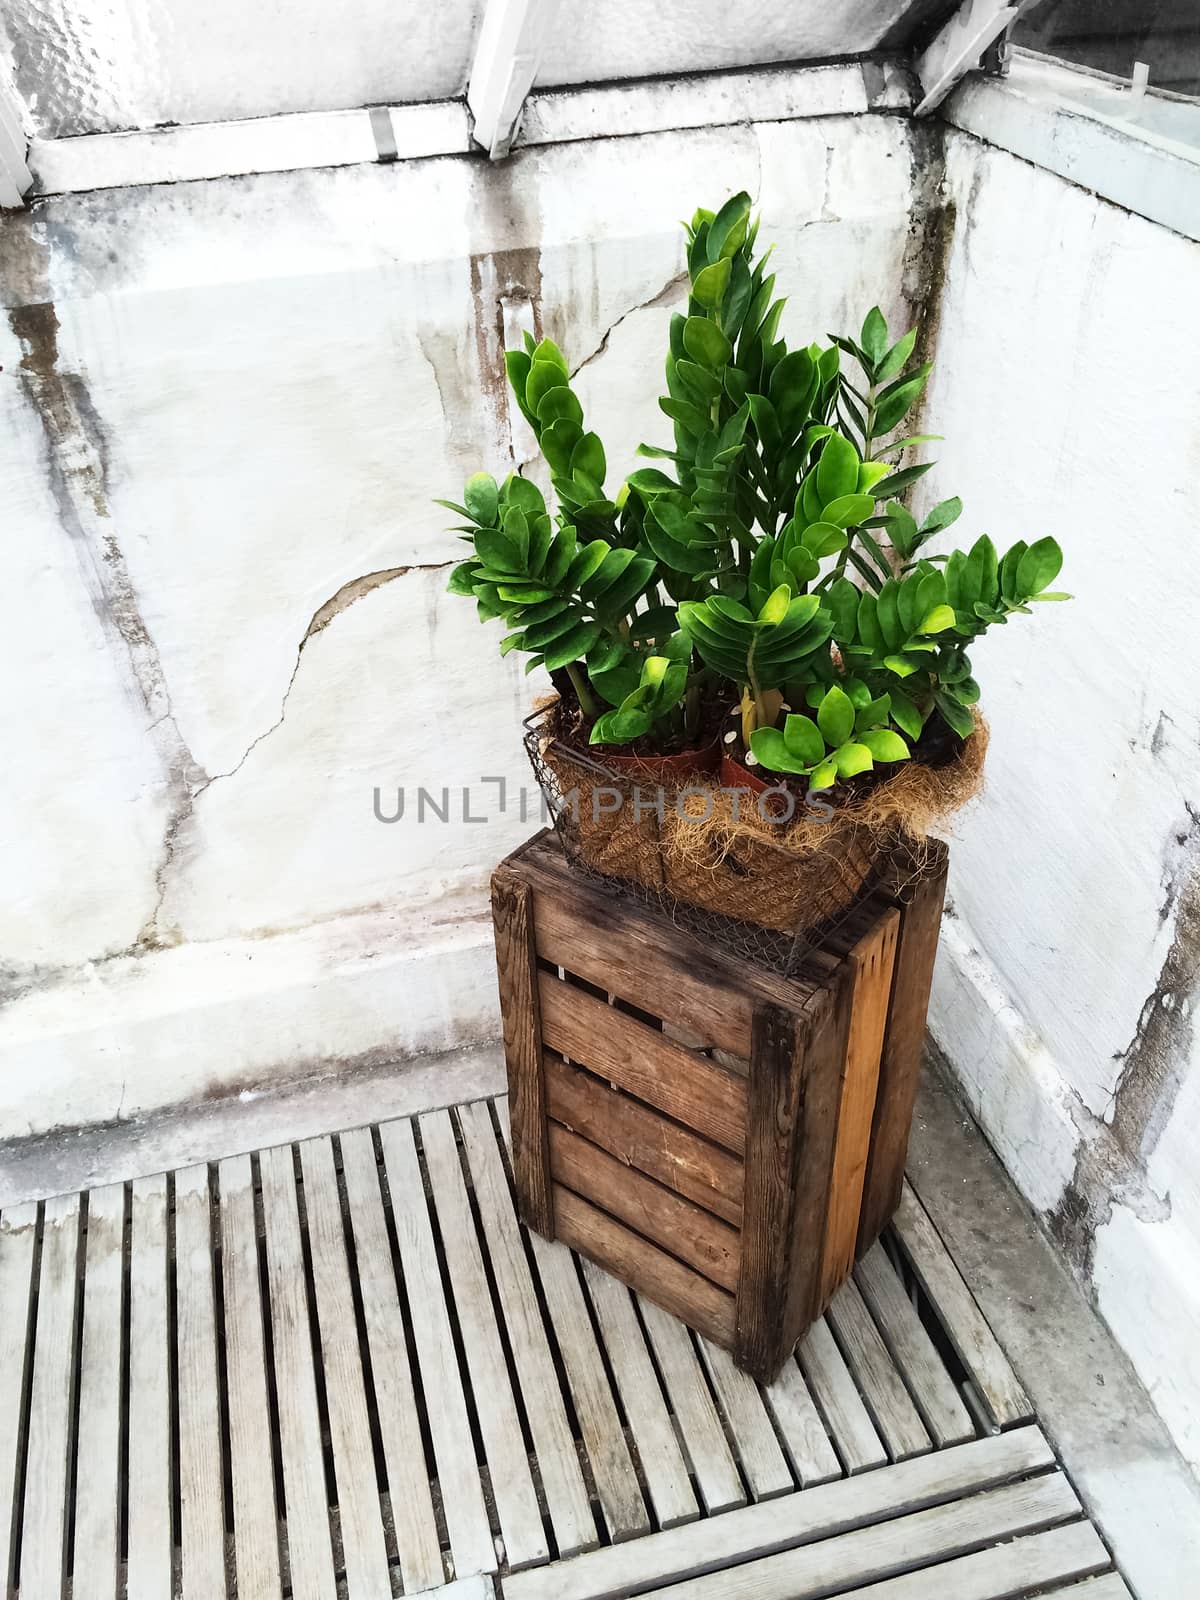 Green plant and wooden crate decorating an old greenhouse.